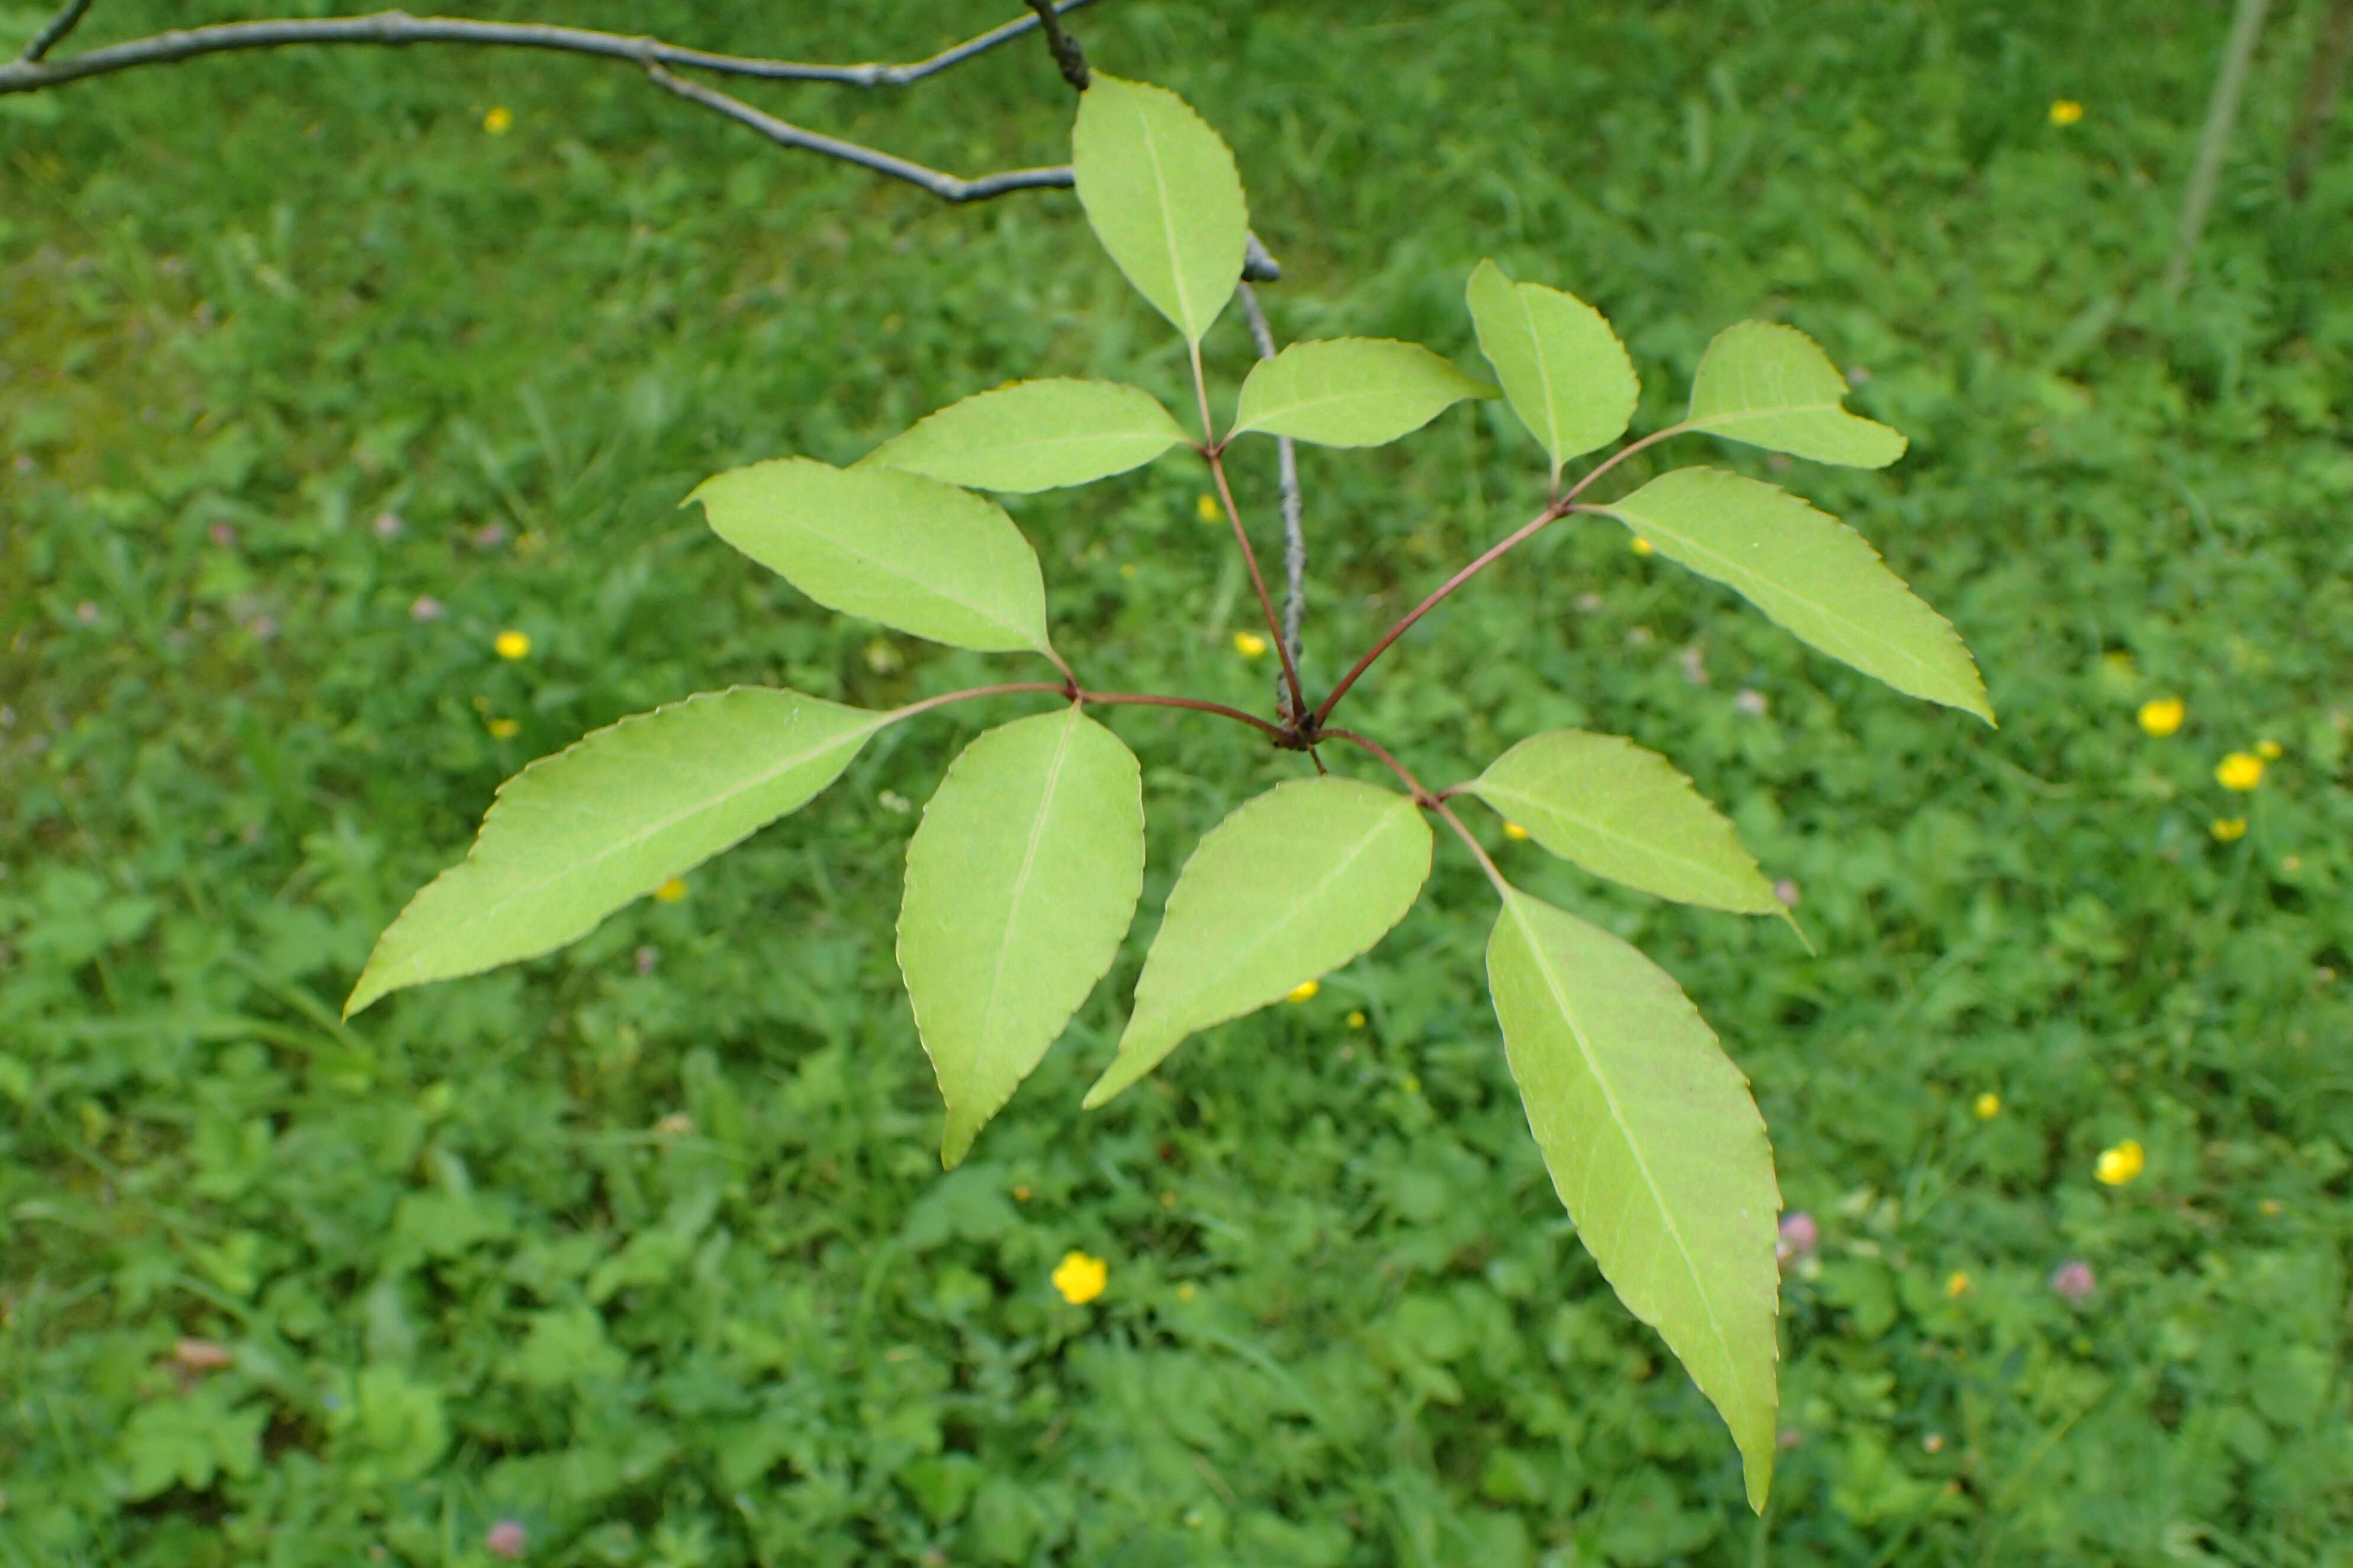 Image of Chinese ash